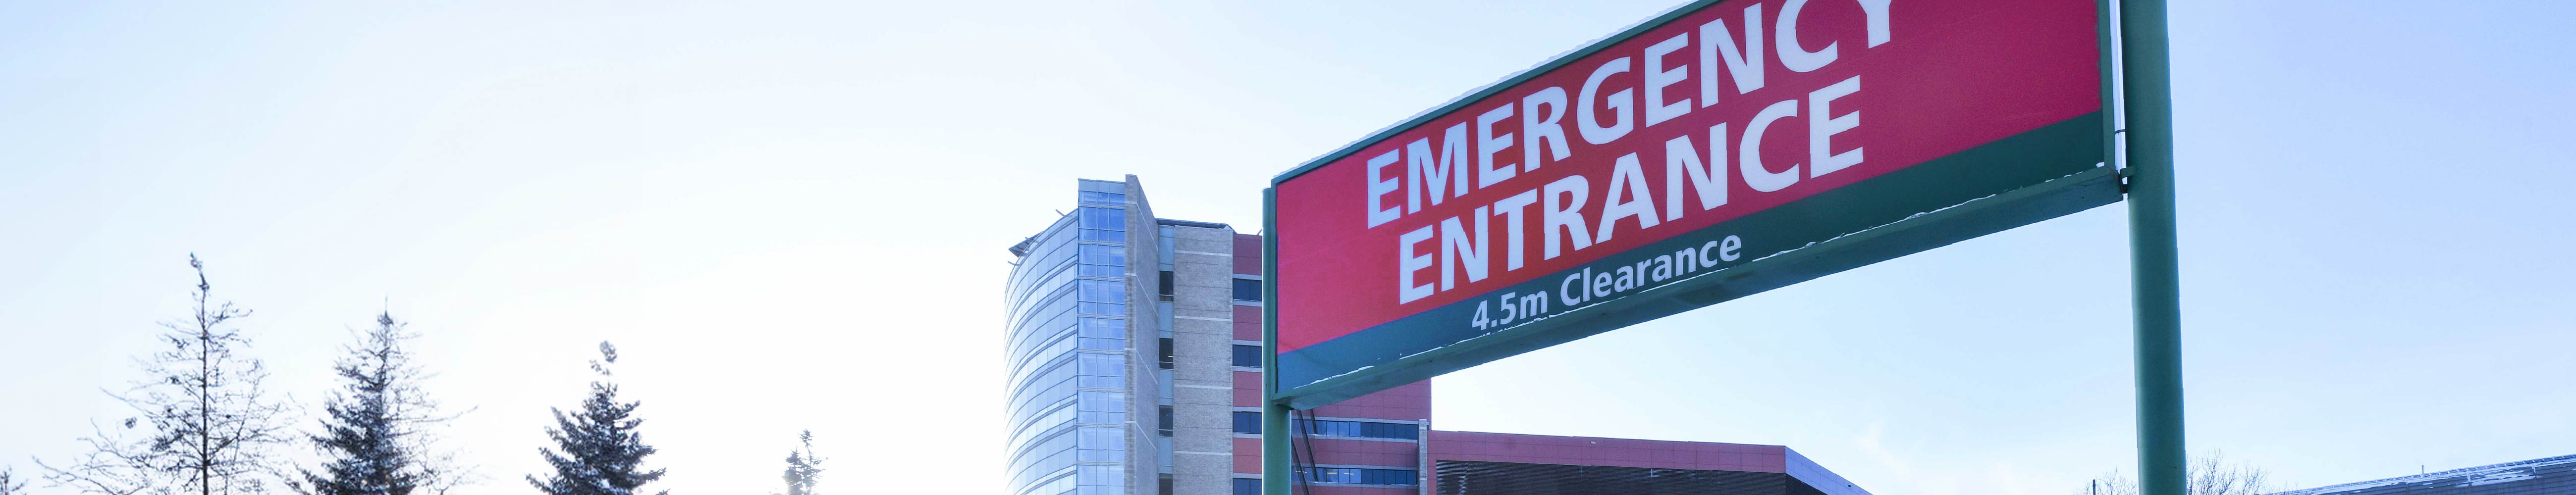 Emergency entrance sign in front of the University of Alberta hospital.